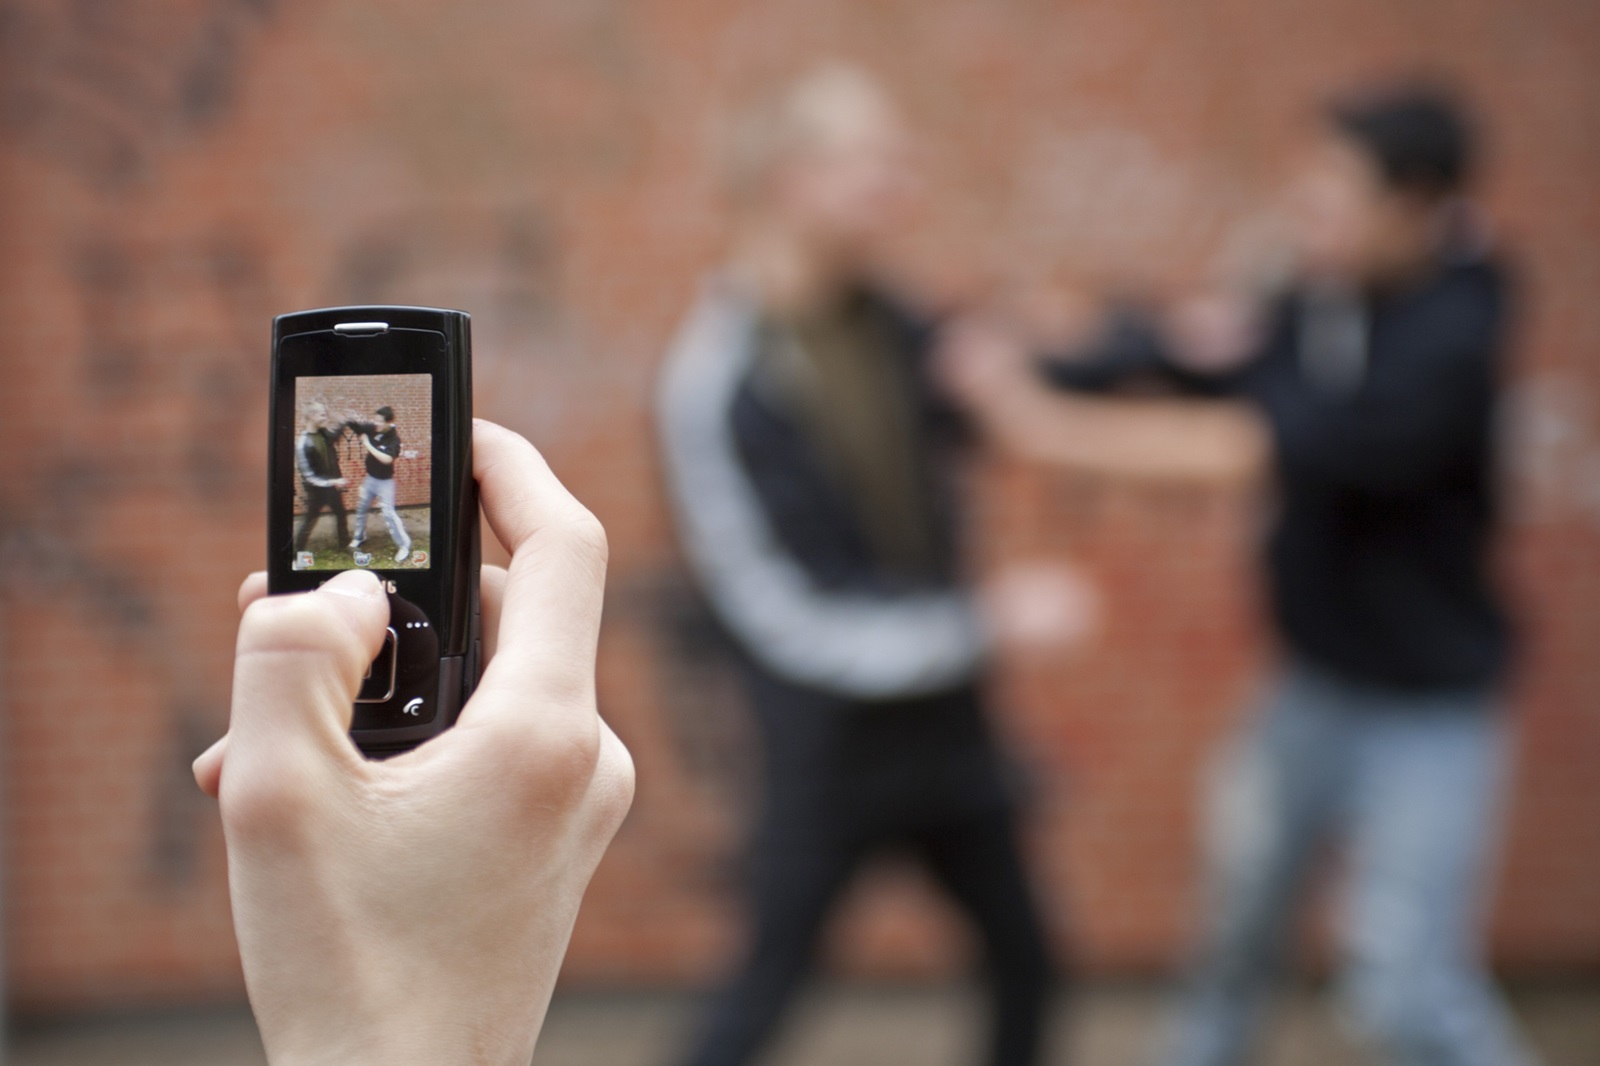 Two boys fighting on the playground while a third films with his cell phone, posed scene,Image: 88633794, License: Rights-managed, Restrictions: , Model Release: yes, Credit line: Siegfried Kuttig / imageBROKER / Profimedia